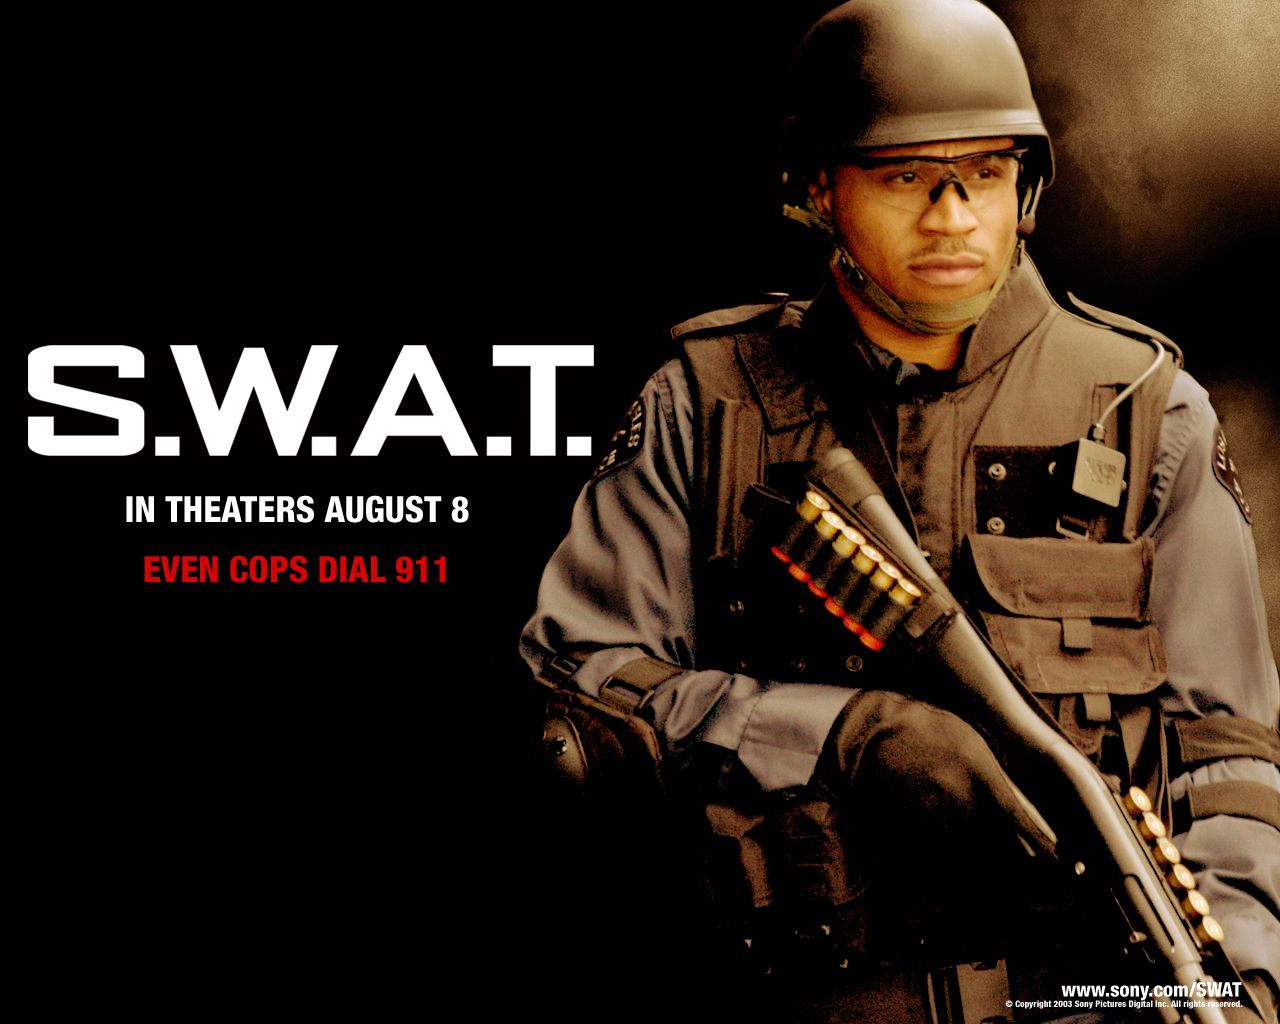 S.W.A.T. | Free Desktop Wallpapers for HD, Widescreen and Mobile